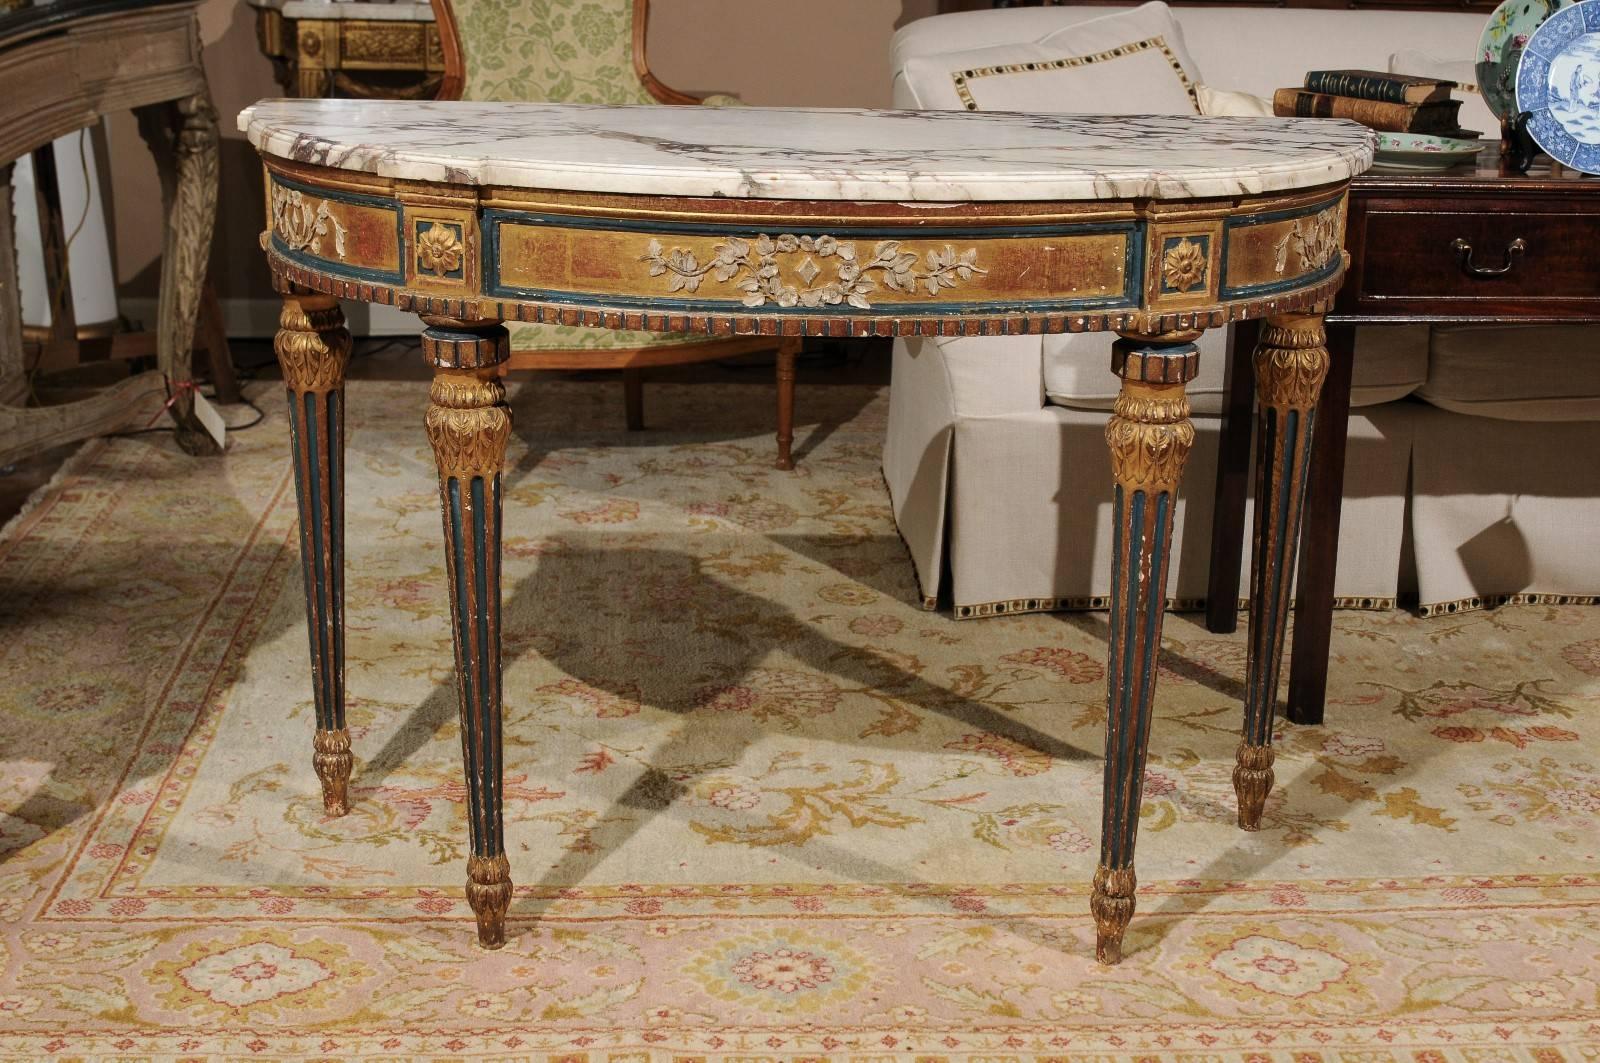 A mid-19th century Louis XVI style carved and painted giltwood console table with D-shaped marble top, molded skirt and fluted tapered legs. Very beautiful!